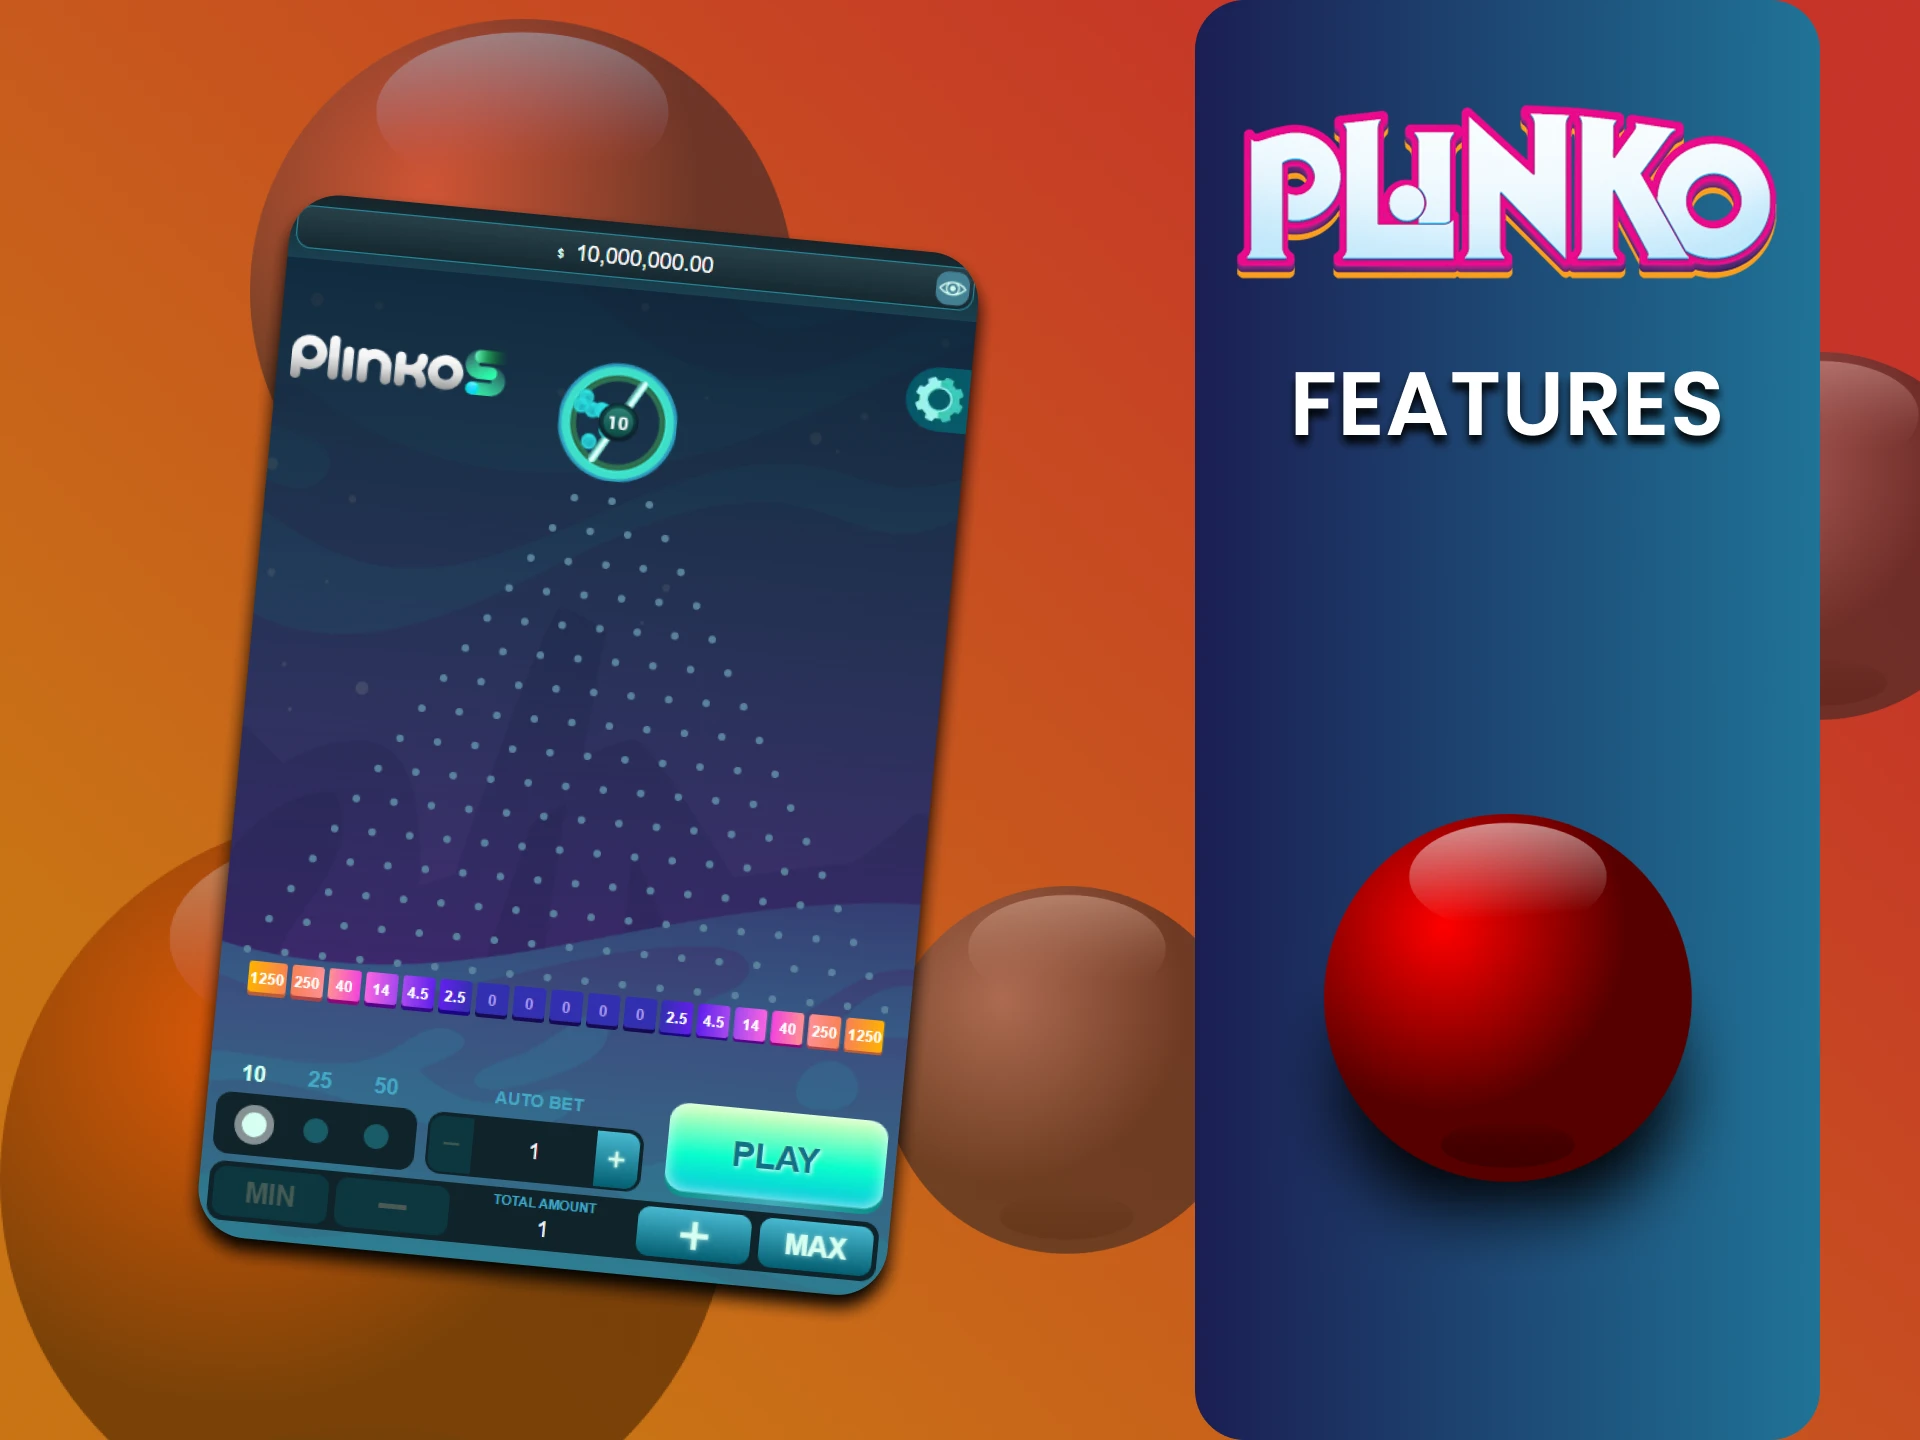 Find out what the Plinko game is like and its capabilities.